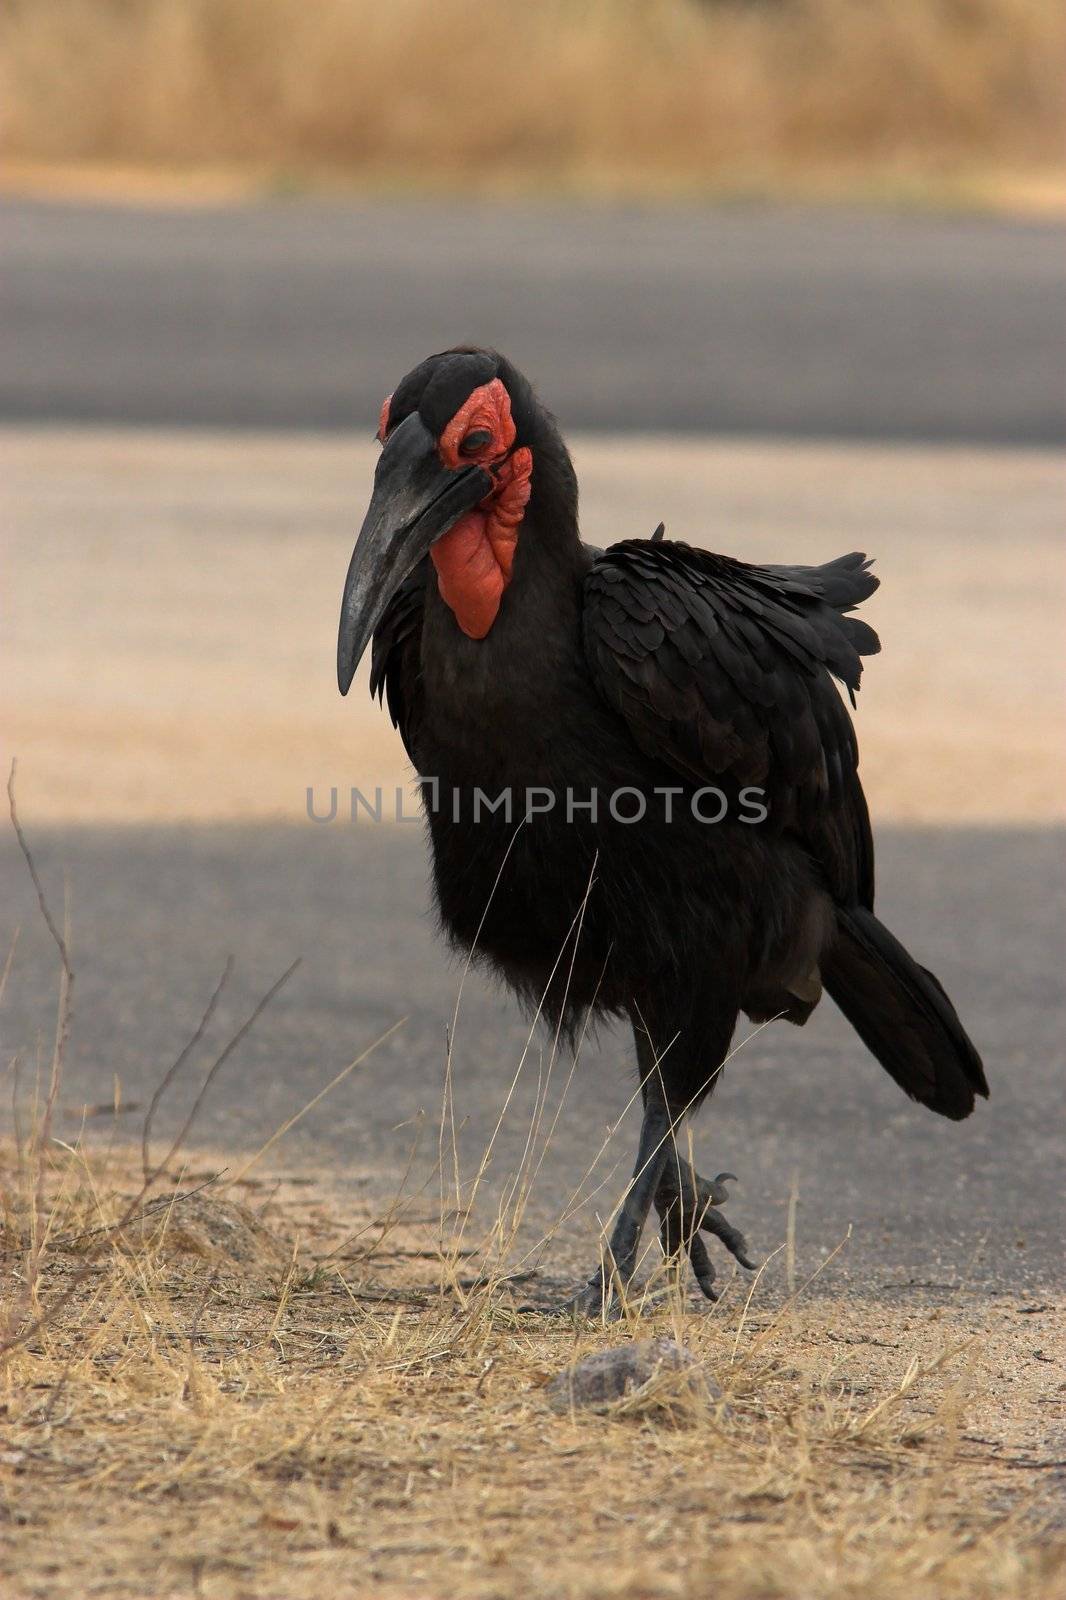 Southern Ground hornbill scavenging for food